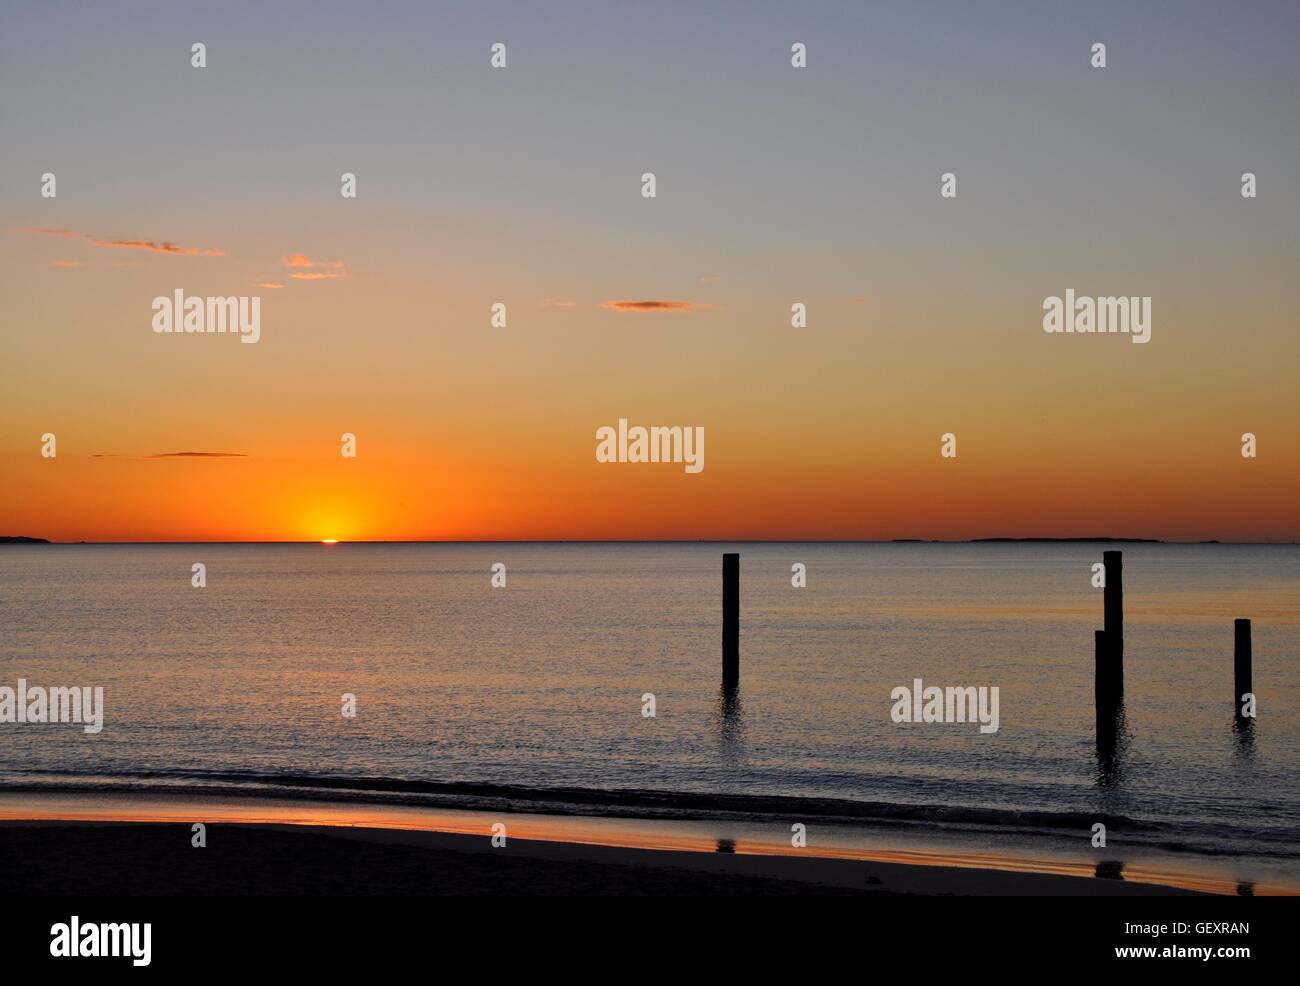 Orange glowing Indian Ocean sunset with calm waters and pilings at Coogee Beach in Coogee, Western Australia. Stock Photo